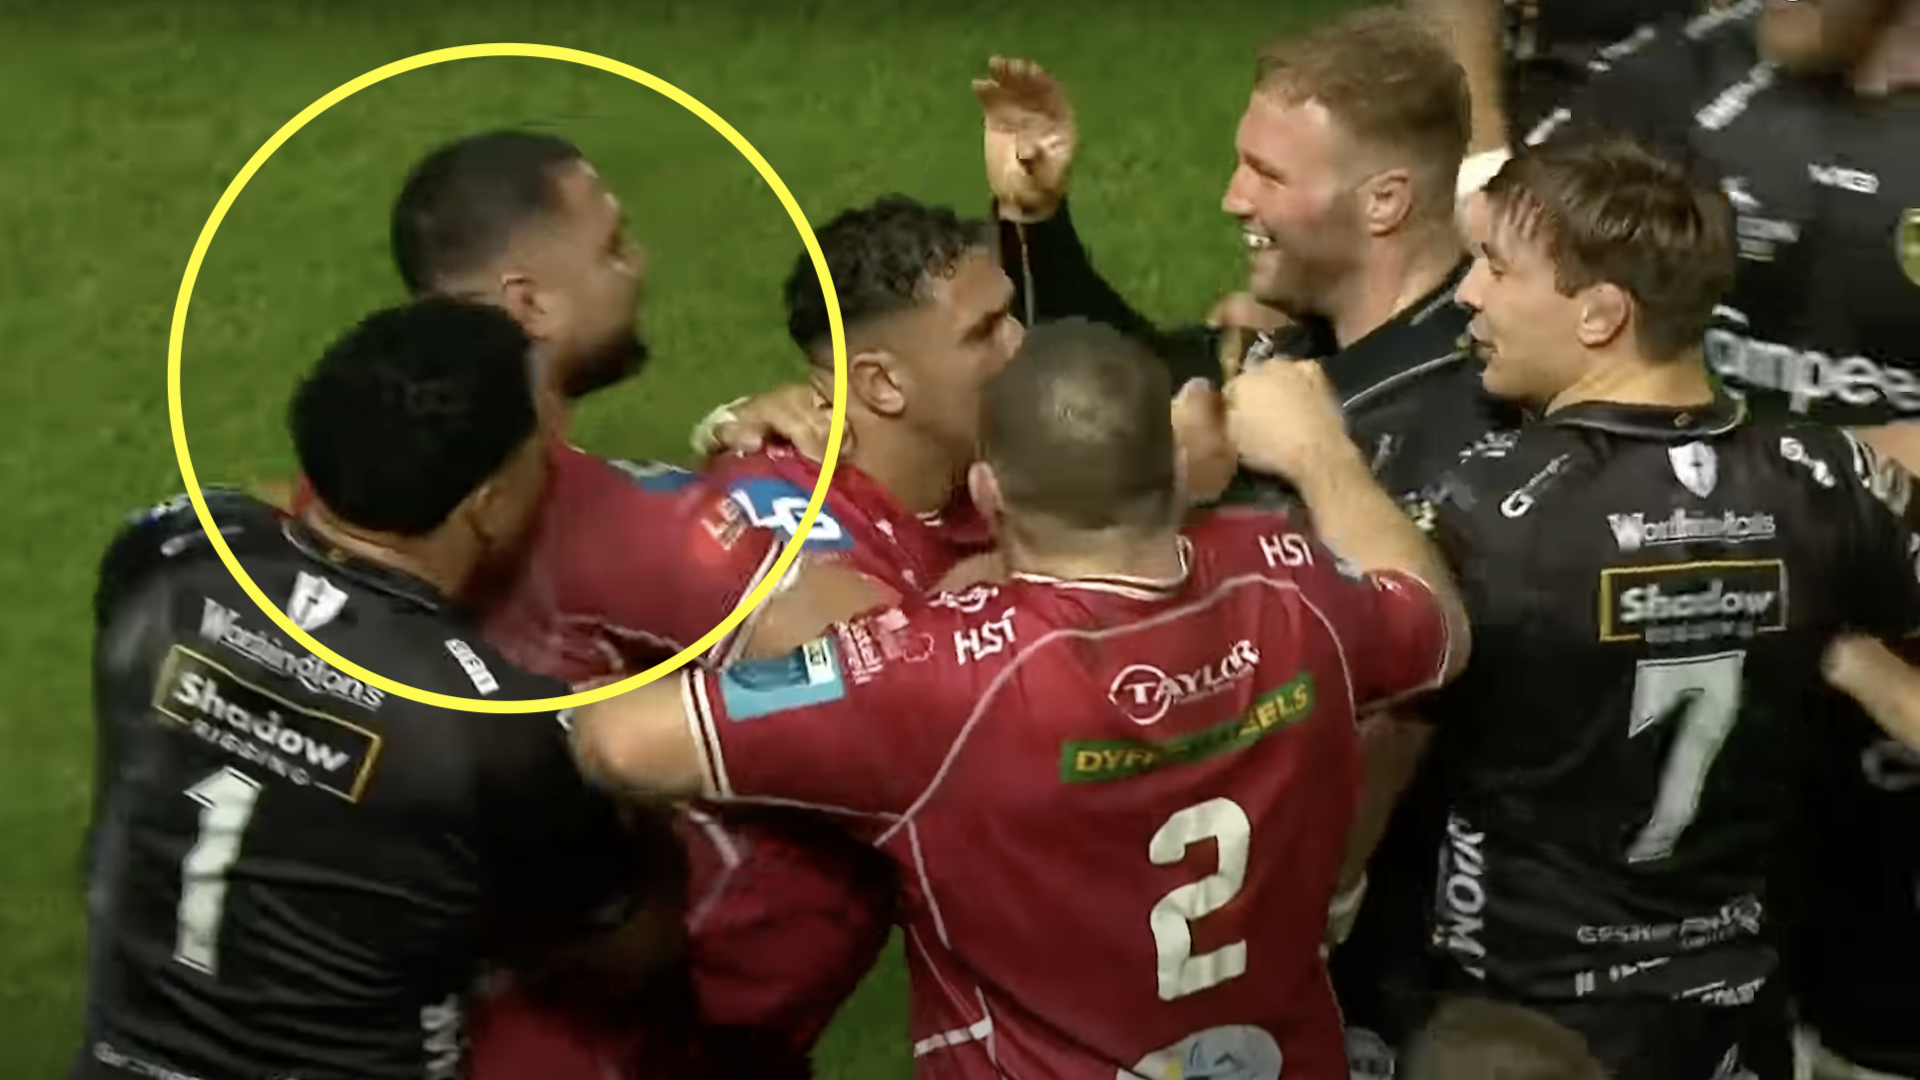 Wales enforcer laughs off red card punch from 120kg opposite man